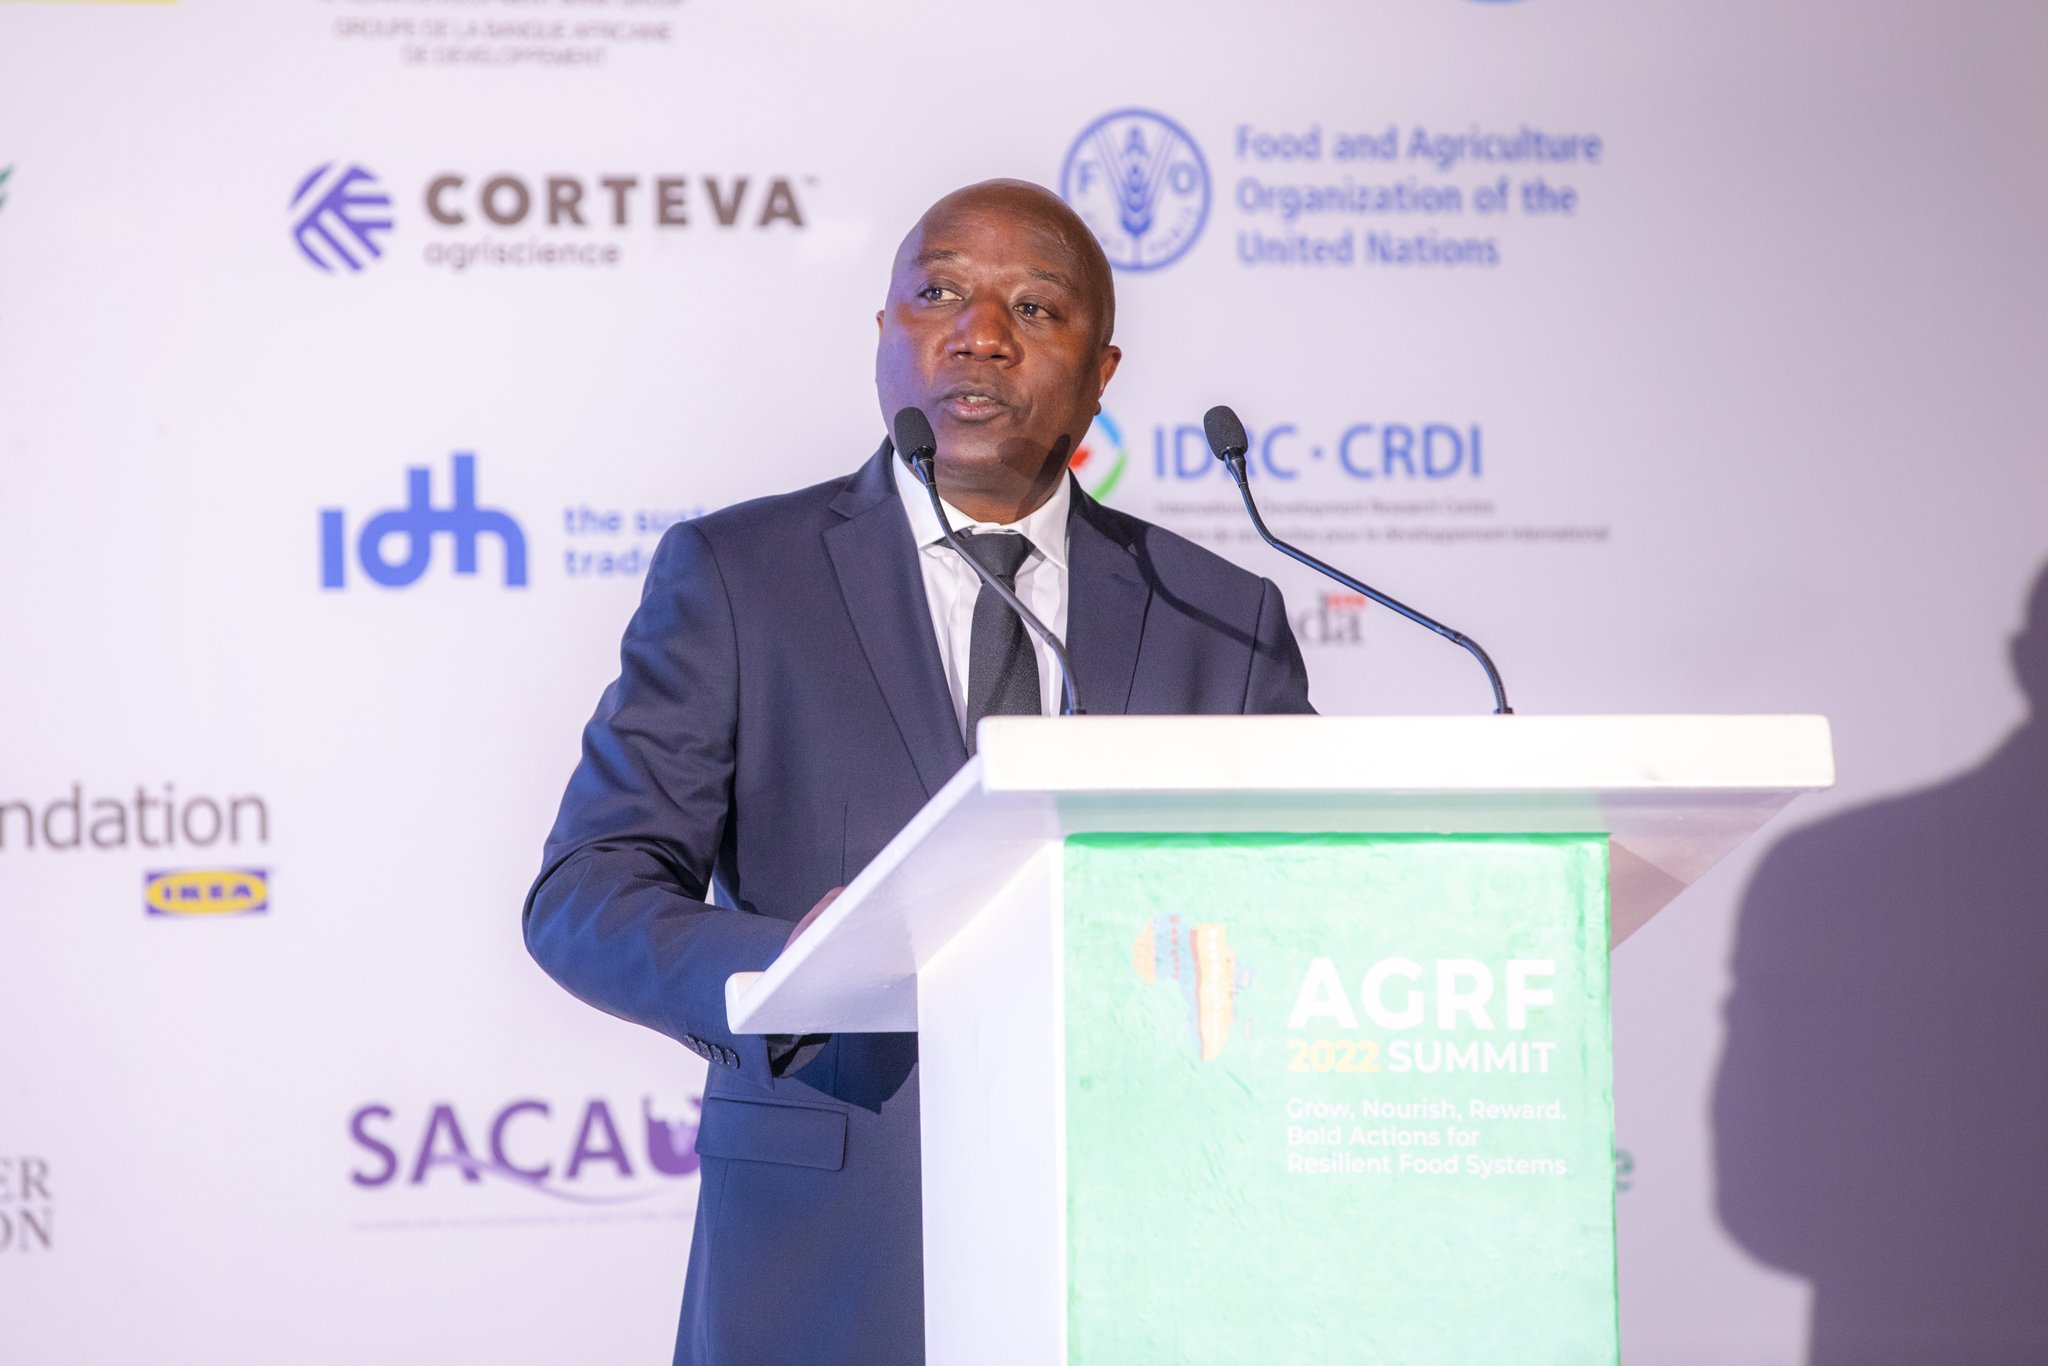 Prime Minister Dr. Edouard Ngirente officiated the launch of the African Green Revolution Forum in Kigali on March 3. / Courtesy